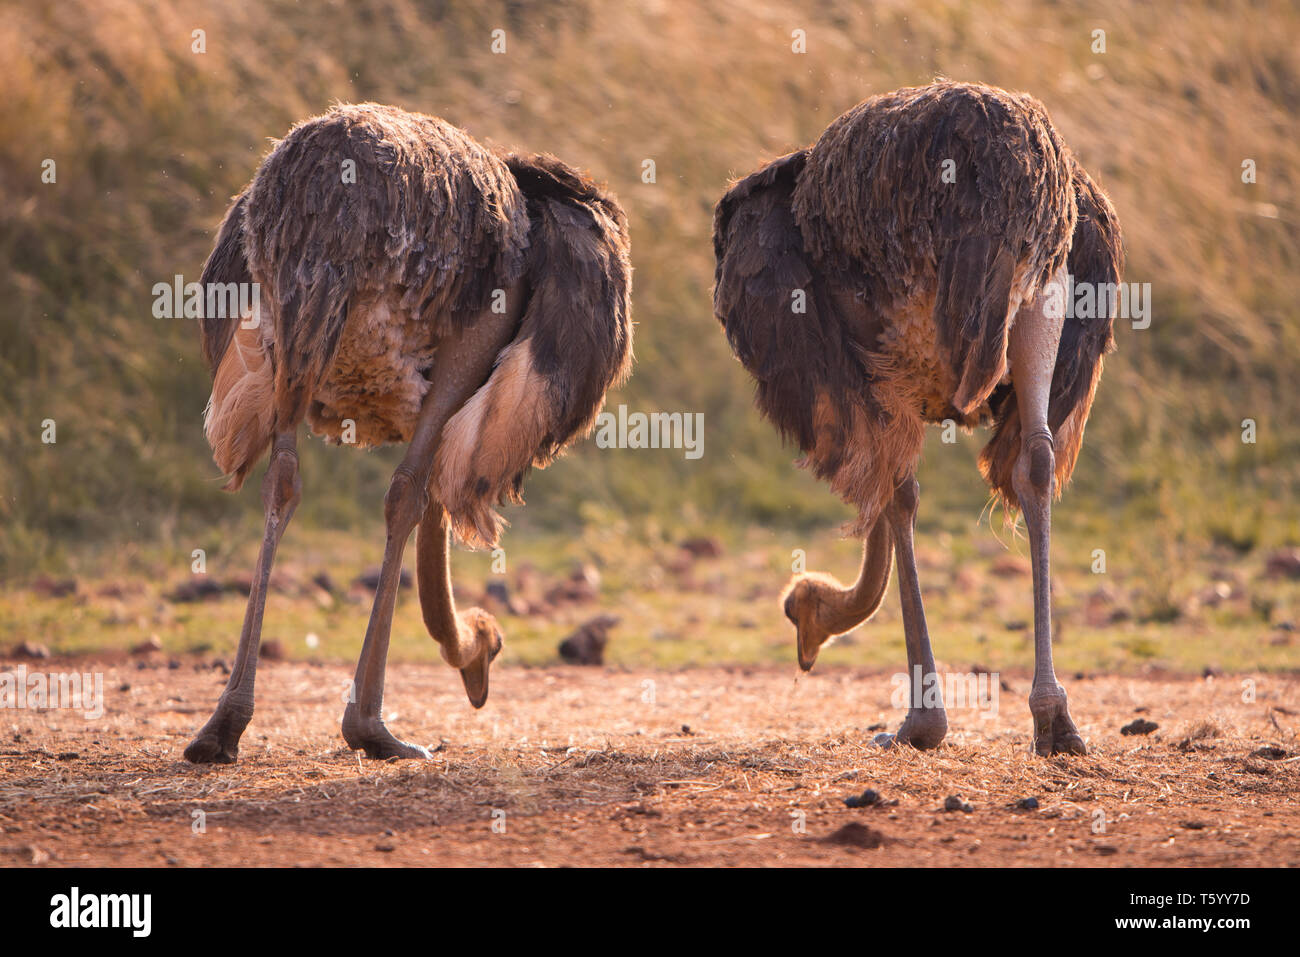 Two ostriches feeding, pictured from behind, South Africa Stock Photo